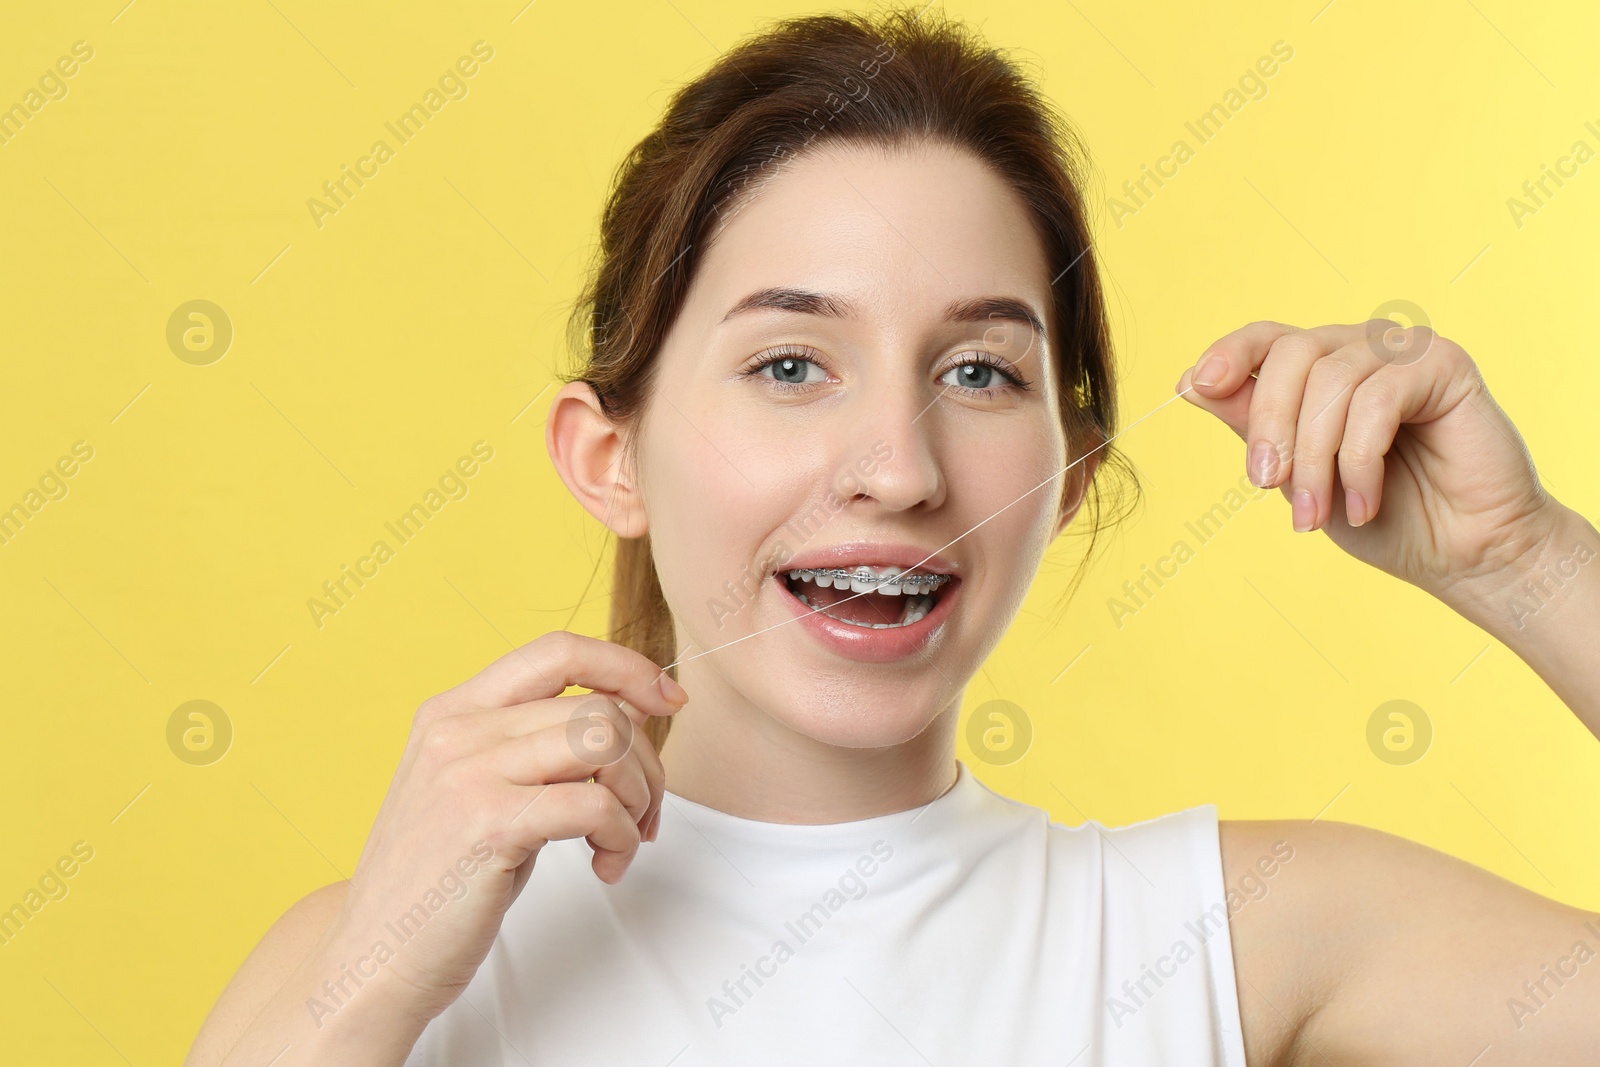 Photo of Smiling woman with braces cleaning teeth using dental floss on yellow background